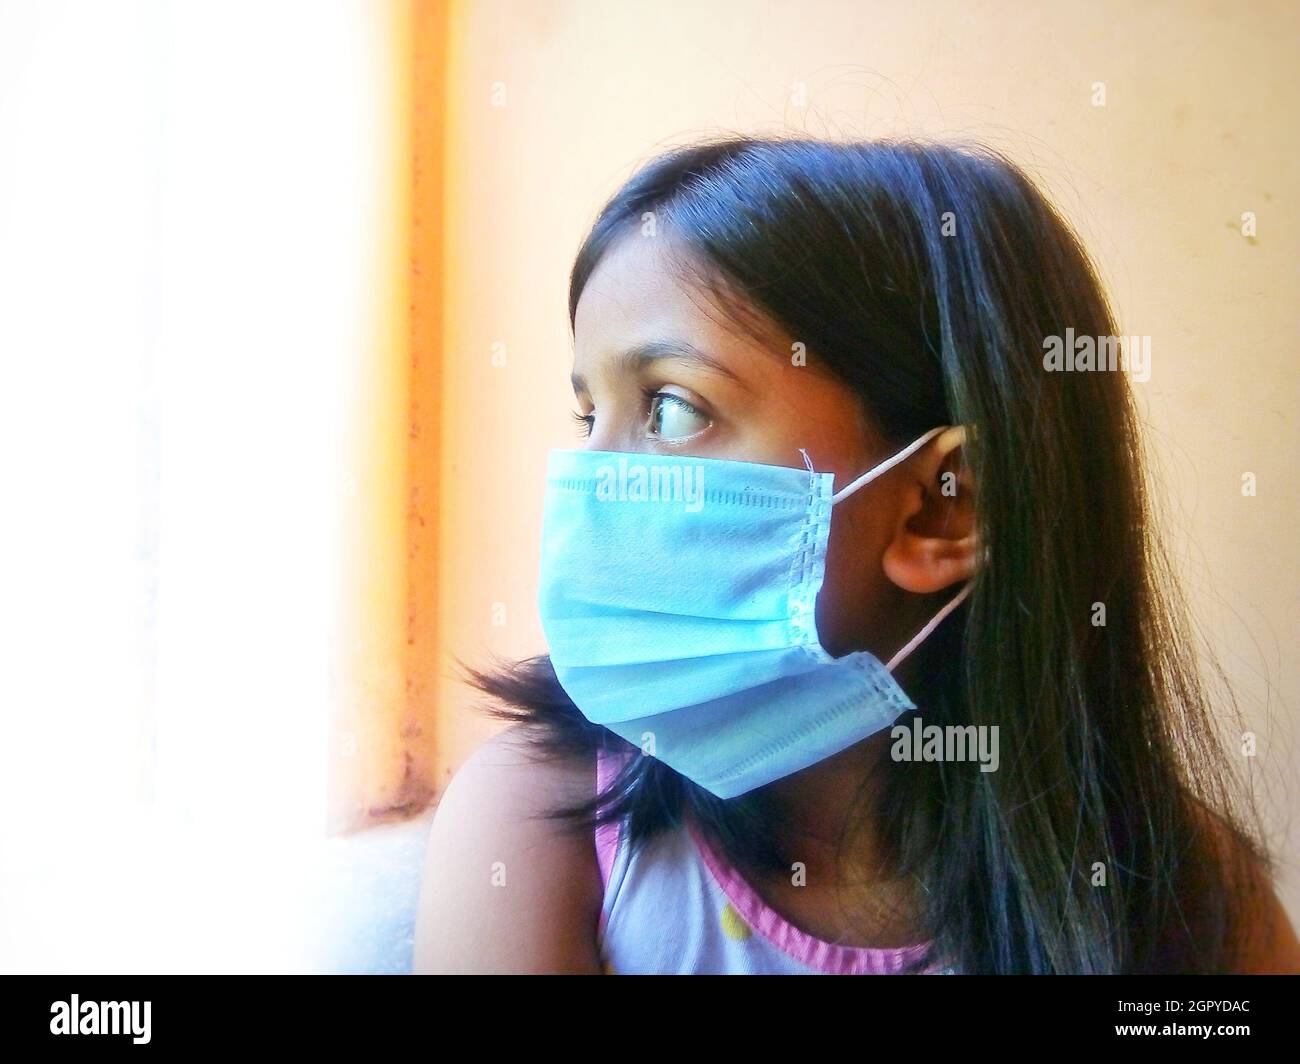 Portrait Of A Girl Wearing Protective Face Mask While Looking Outside The Window, India Stock Photo